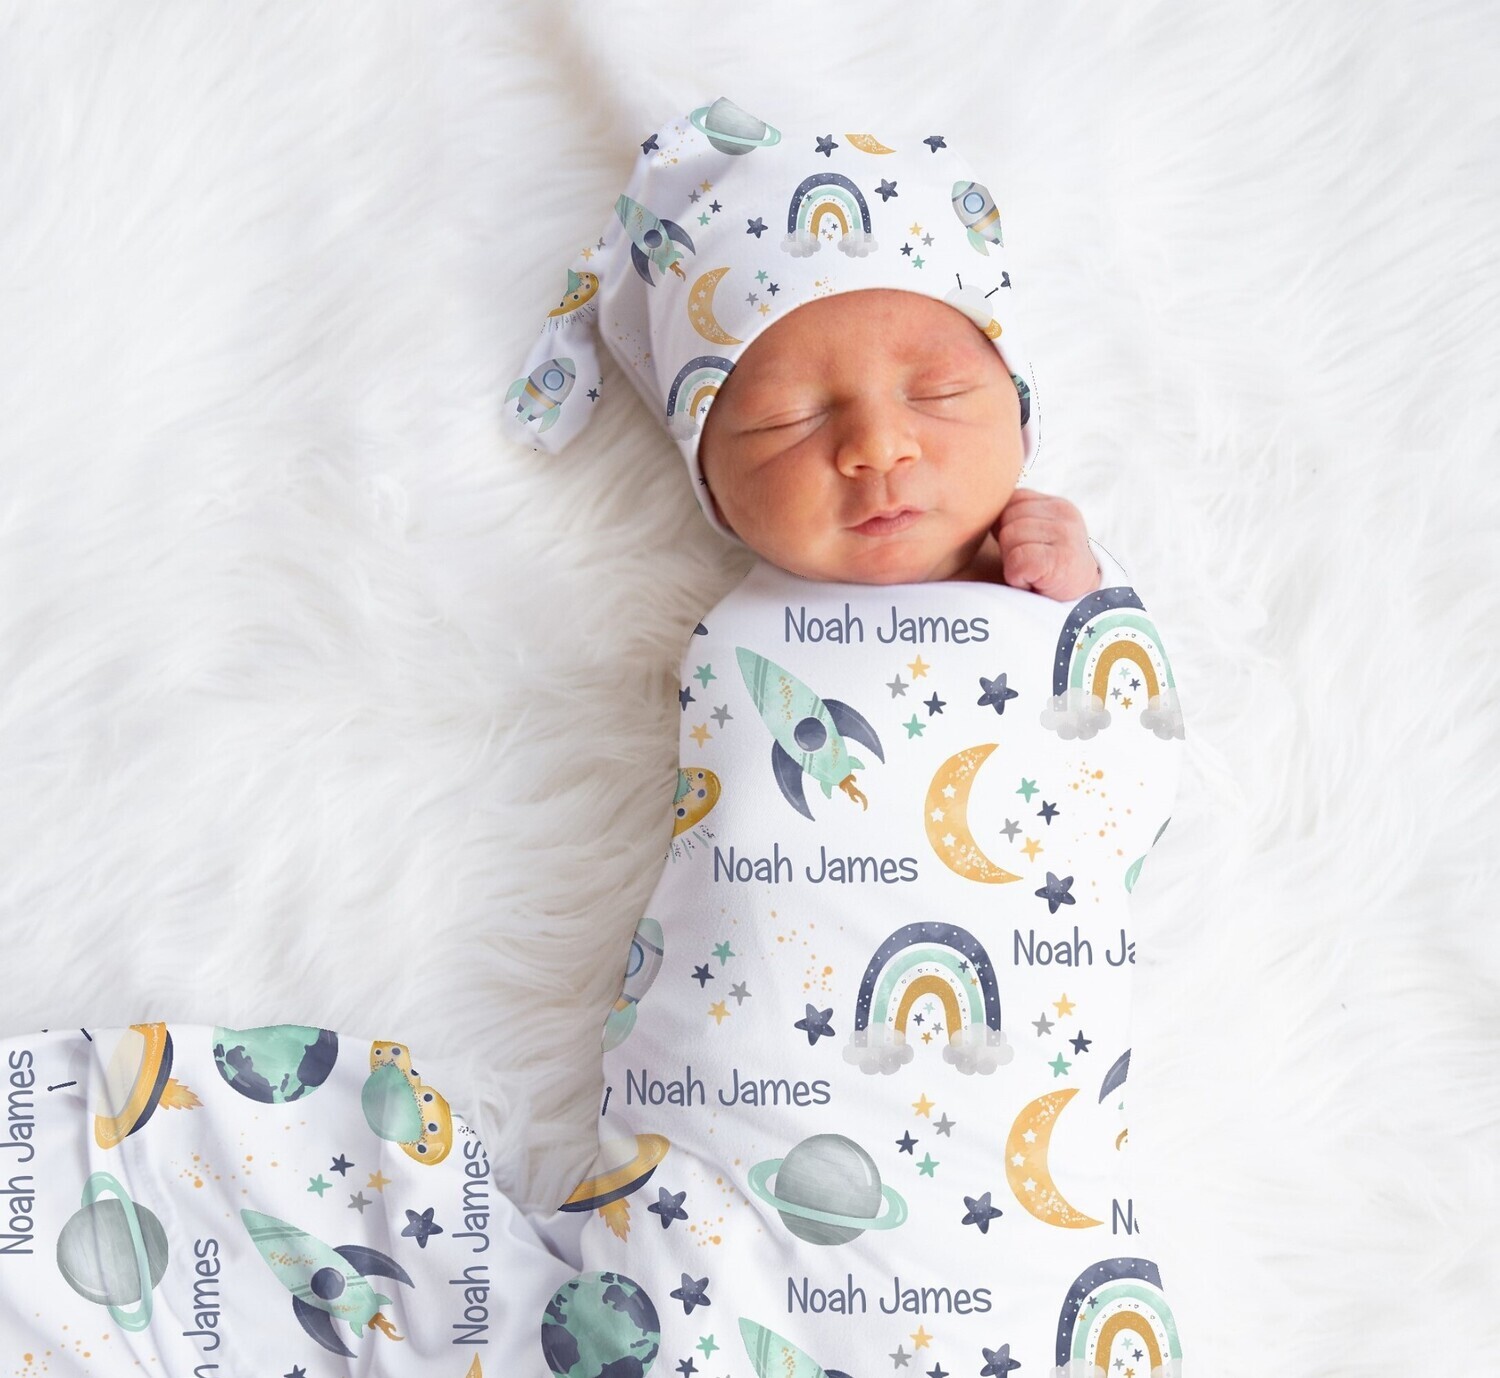 Space Personalized Baby Boy Swaddle Blanket Newborn Swaddle Blanket Knotted Baby Cap Headband Baby Gift Hospital Photo Newborn Photo Newborn Blanket